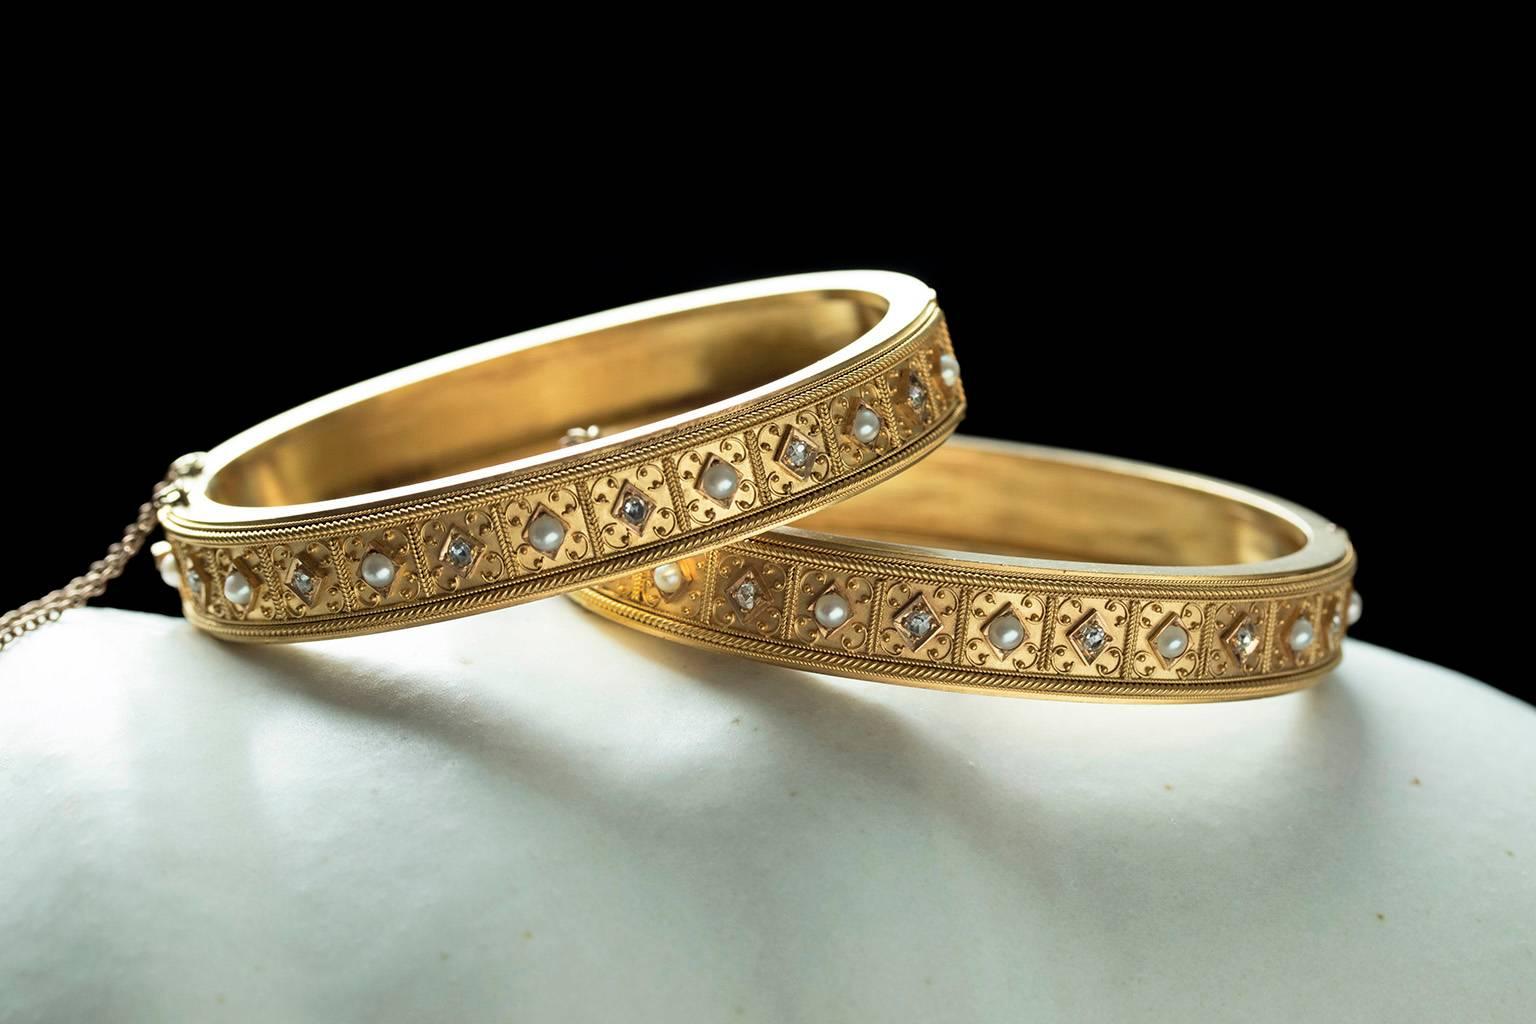 C.1860-1870. A gorgeous pair of Victorian matched set of gold bangle bracelets. The Etruscan revival motif in these bangles features finely done granulation work and rope details around rose cut diamonds and pearls.  The hinge and push clasp are all